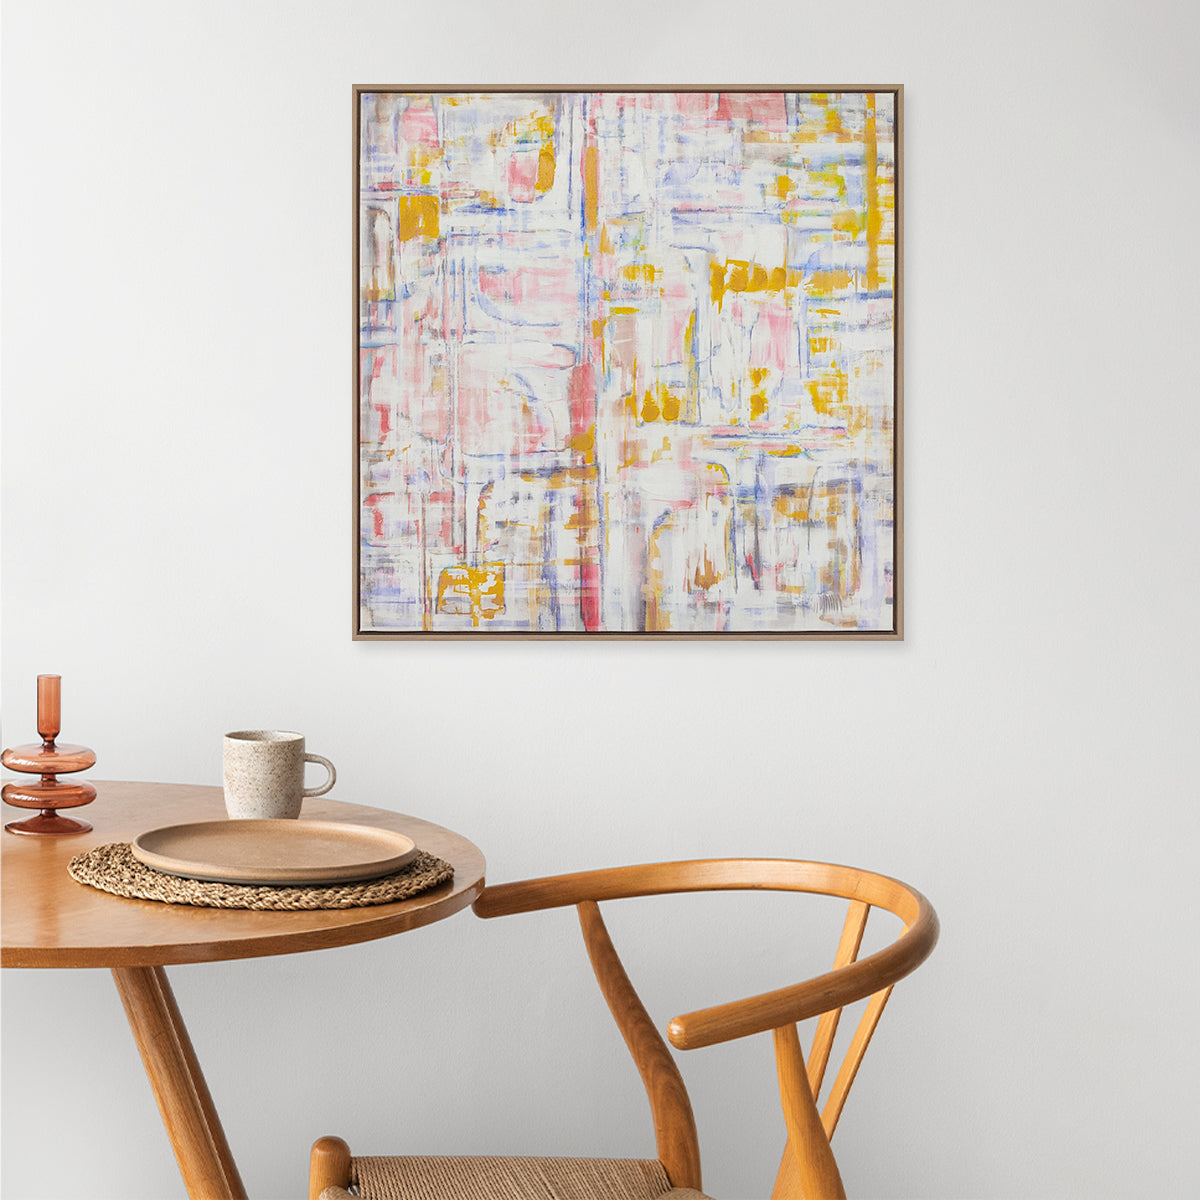 Abstract textured wall art affordable oil painting framed colourful square in dining room